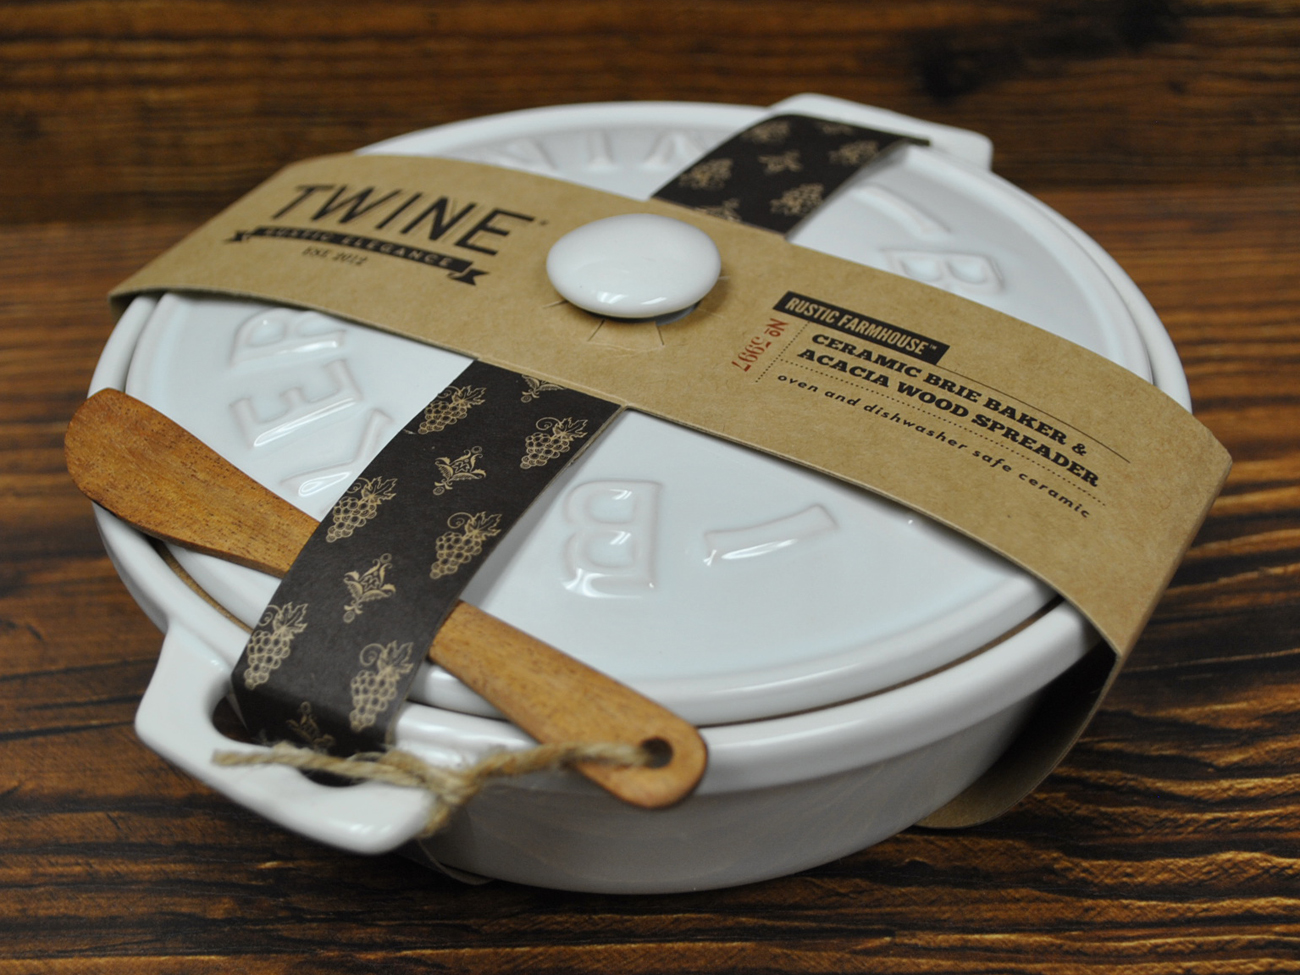 Brie Bakers Are Now In Stock!